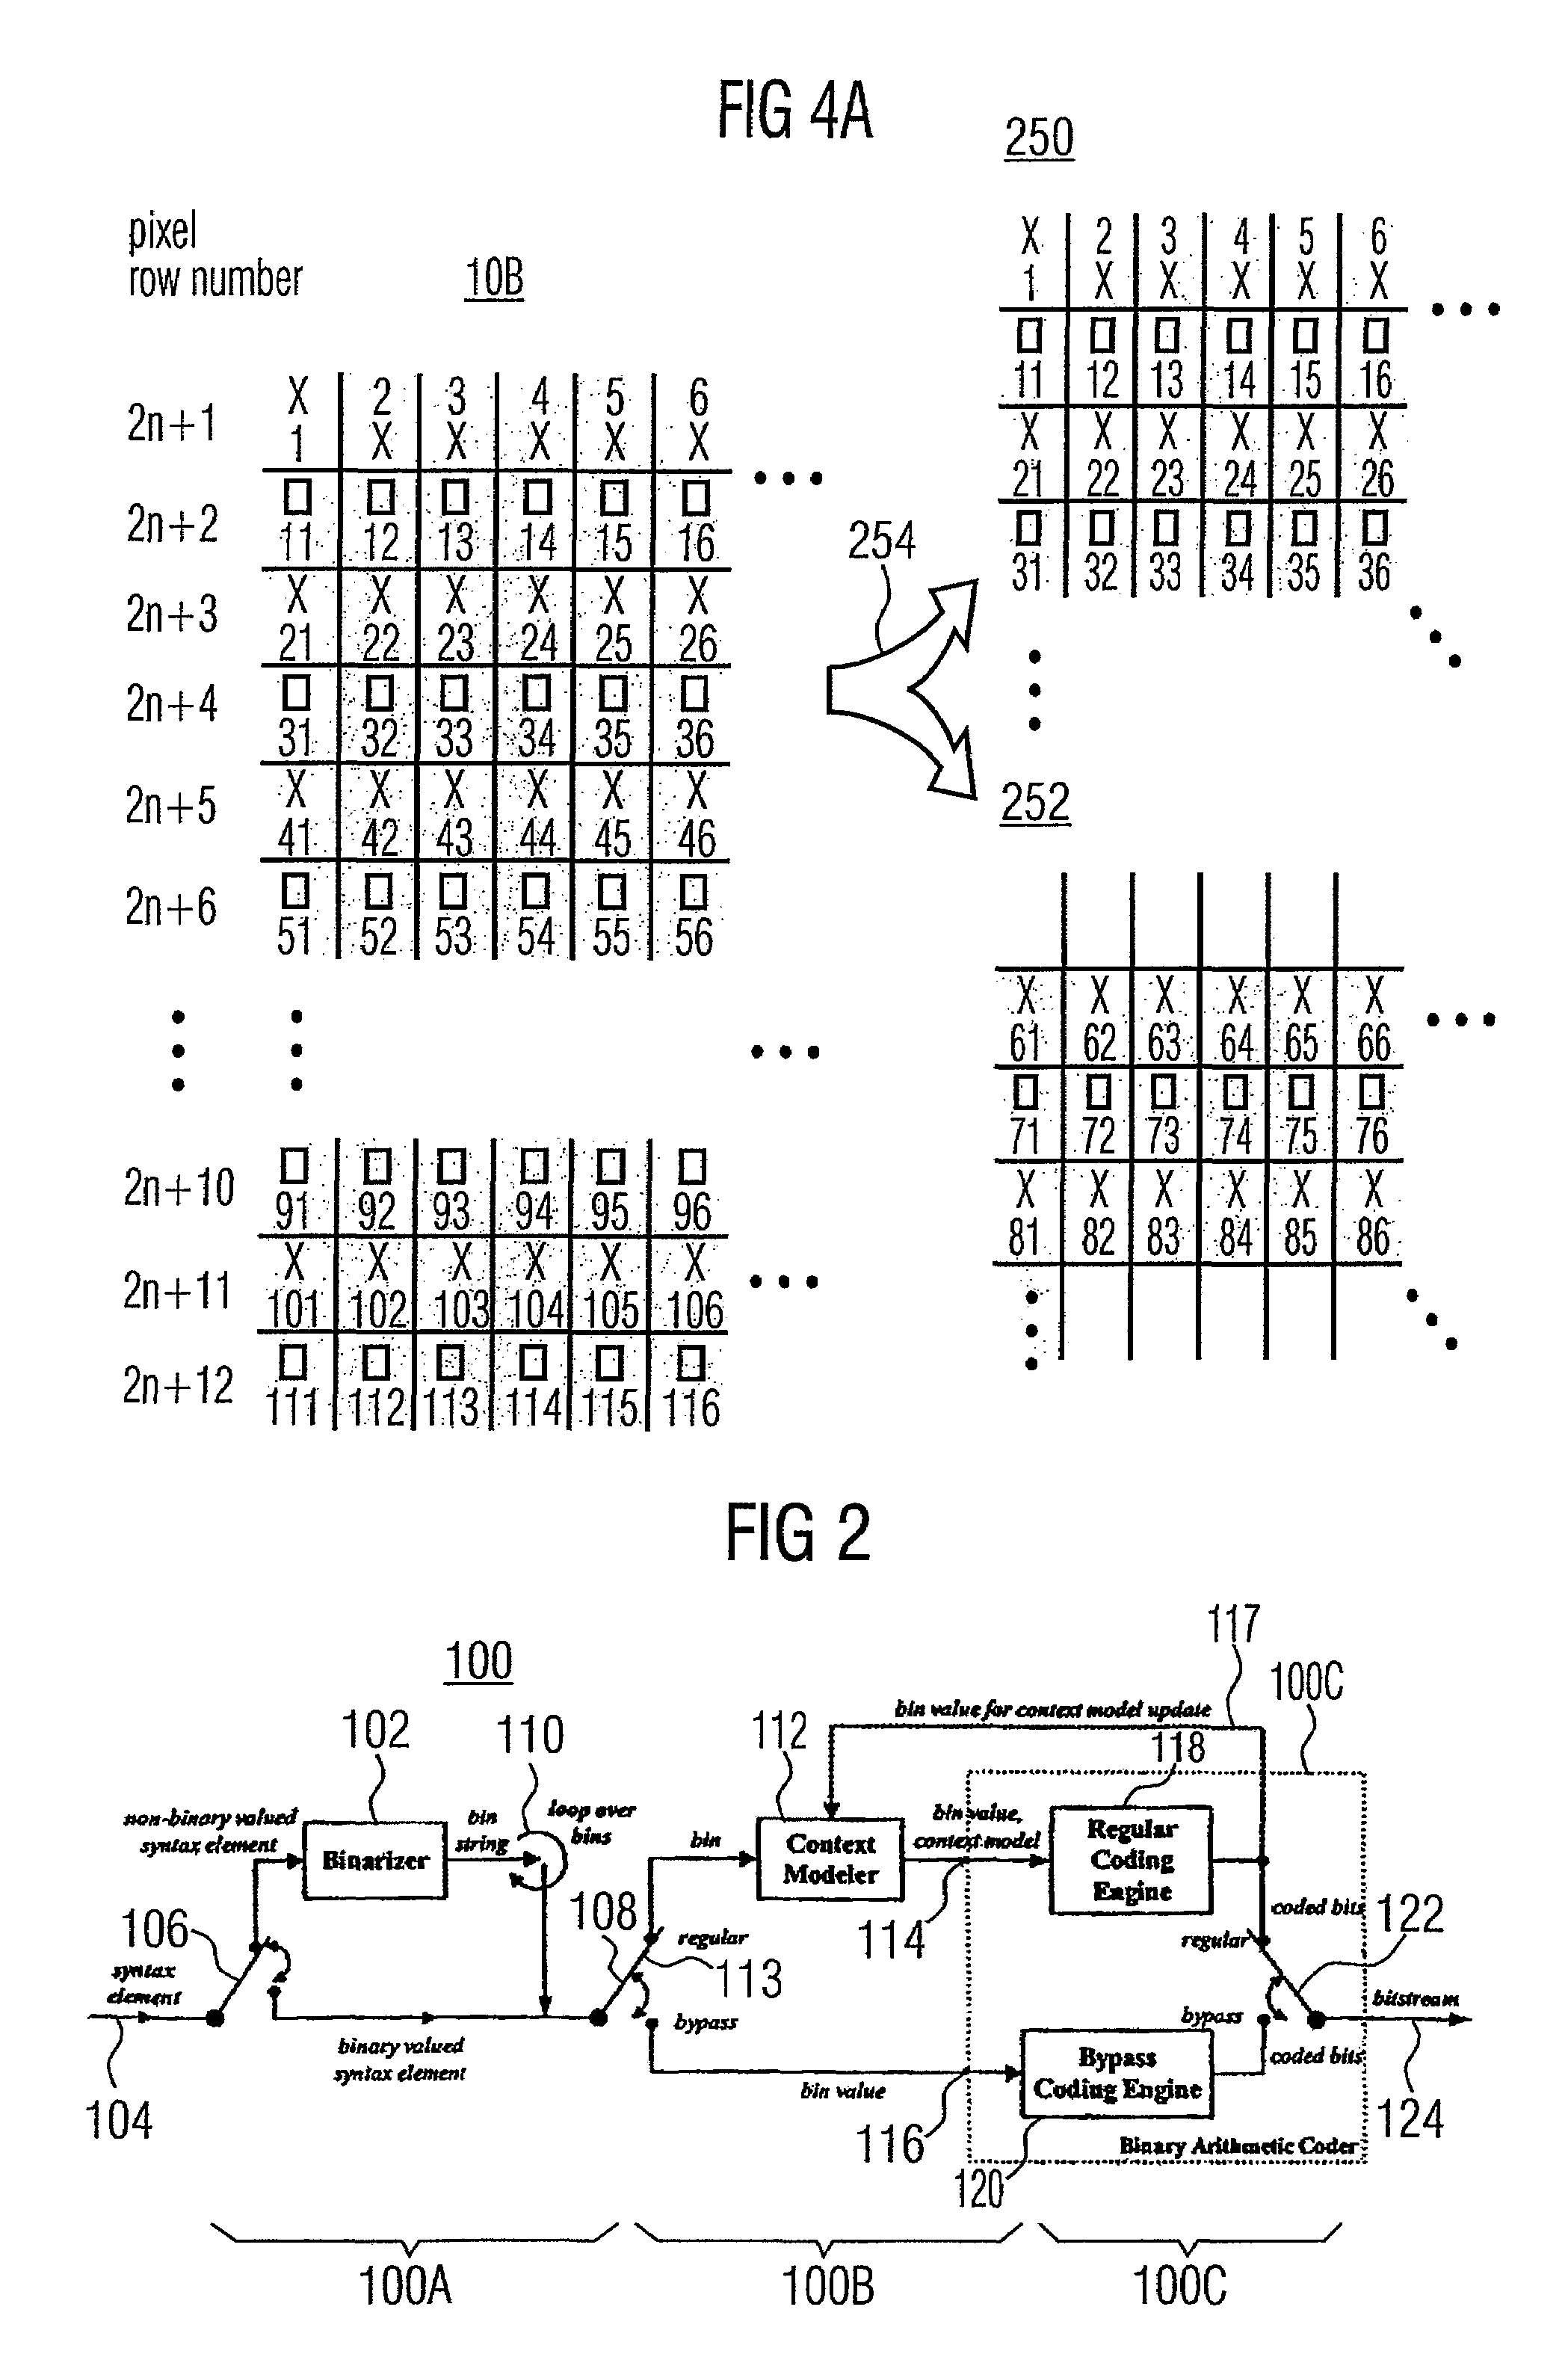 Coding of a syntax element contained in a pre-coded video signal